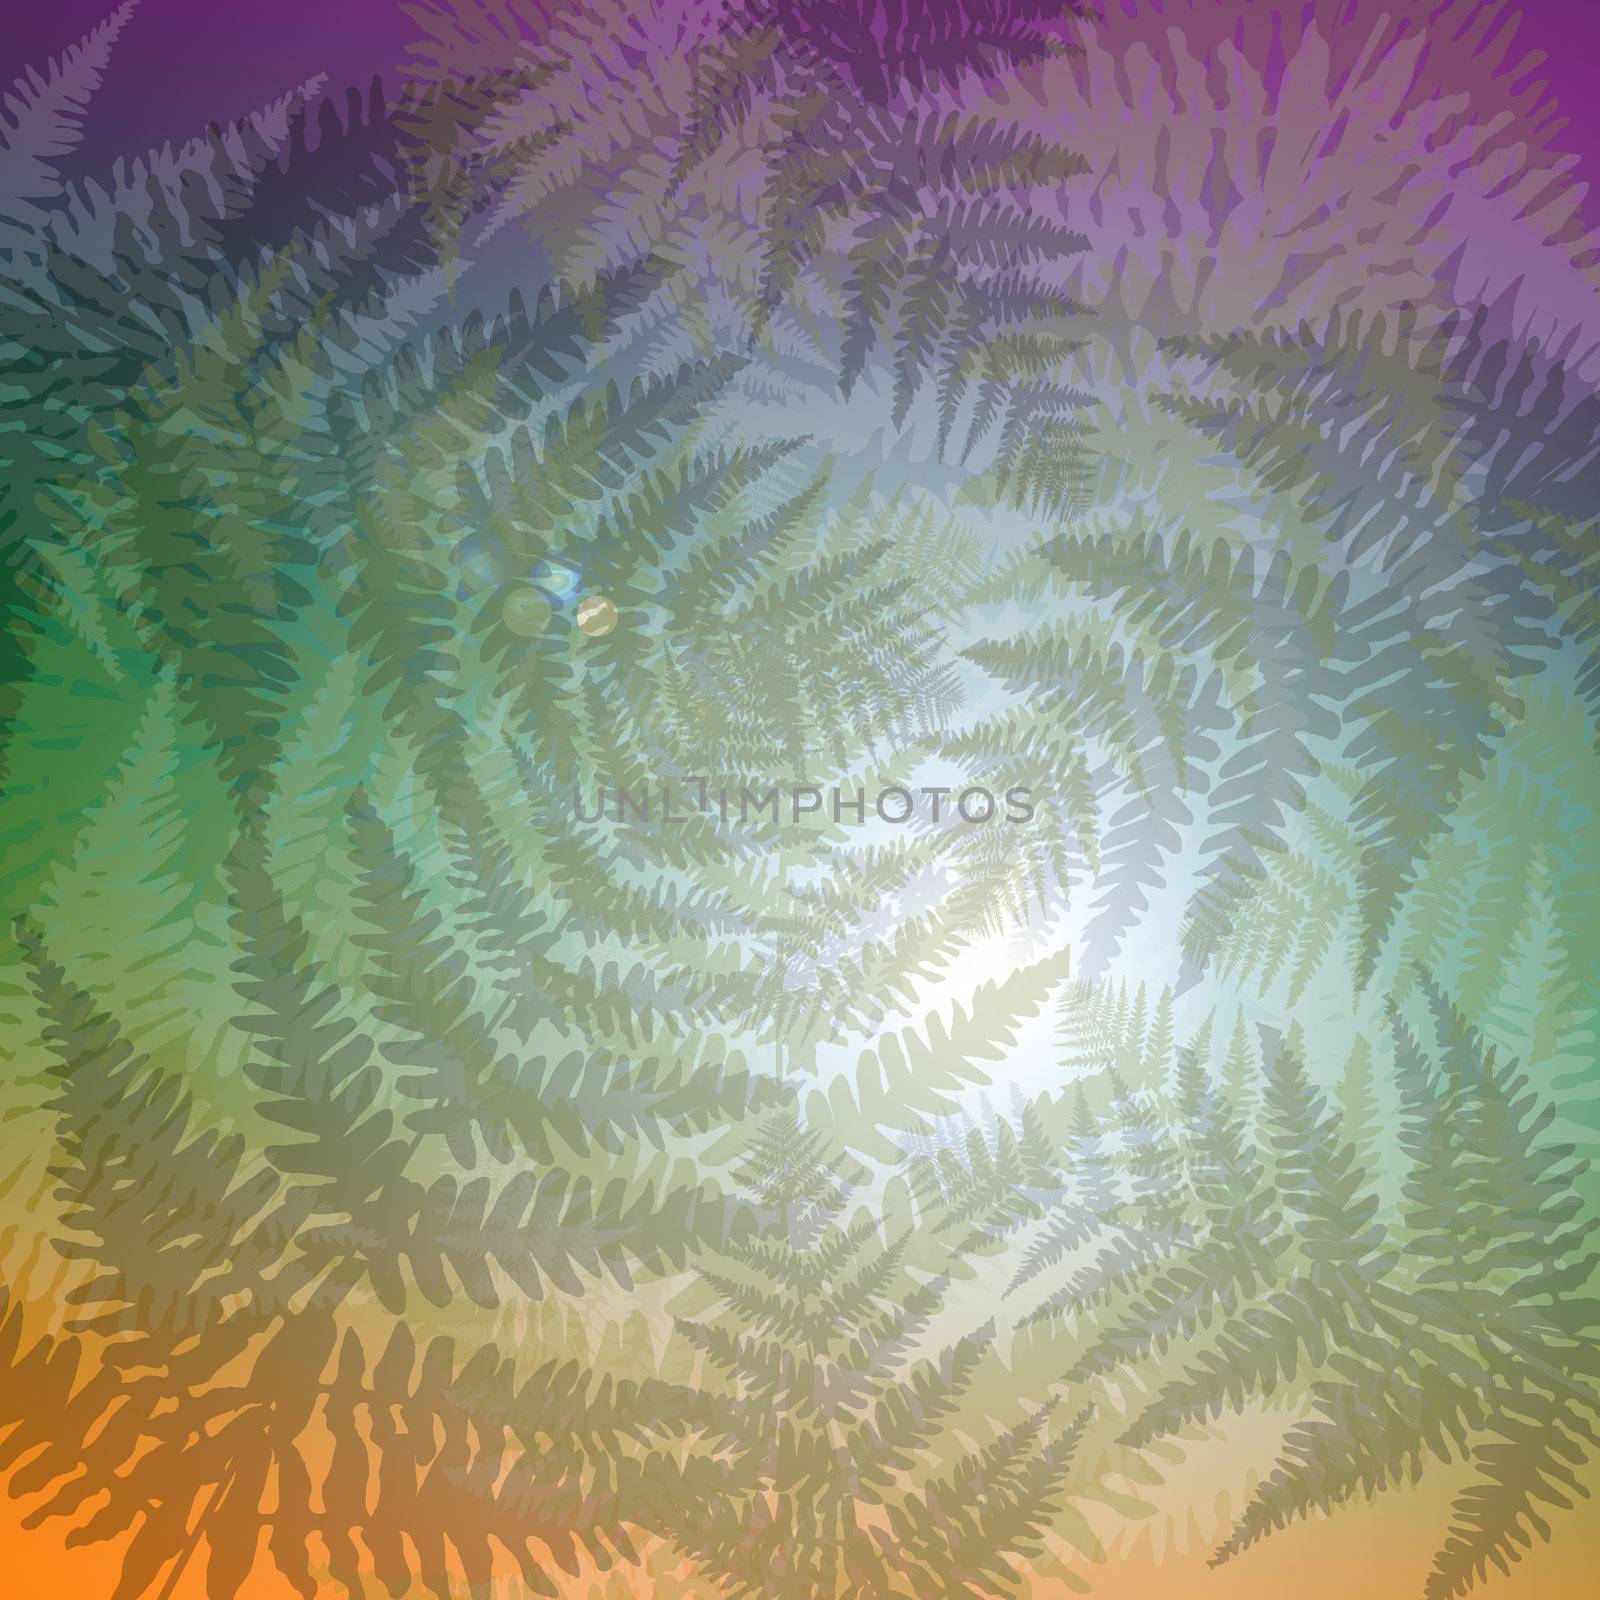 Abstract illustration depicting many autumnal fern leaves against abstract light effect background.